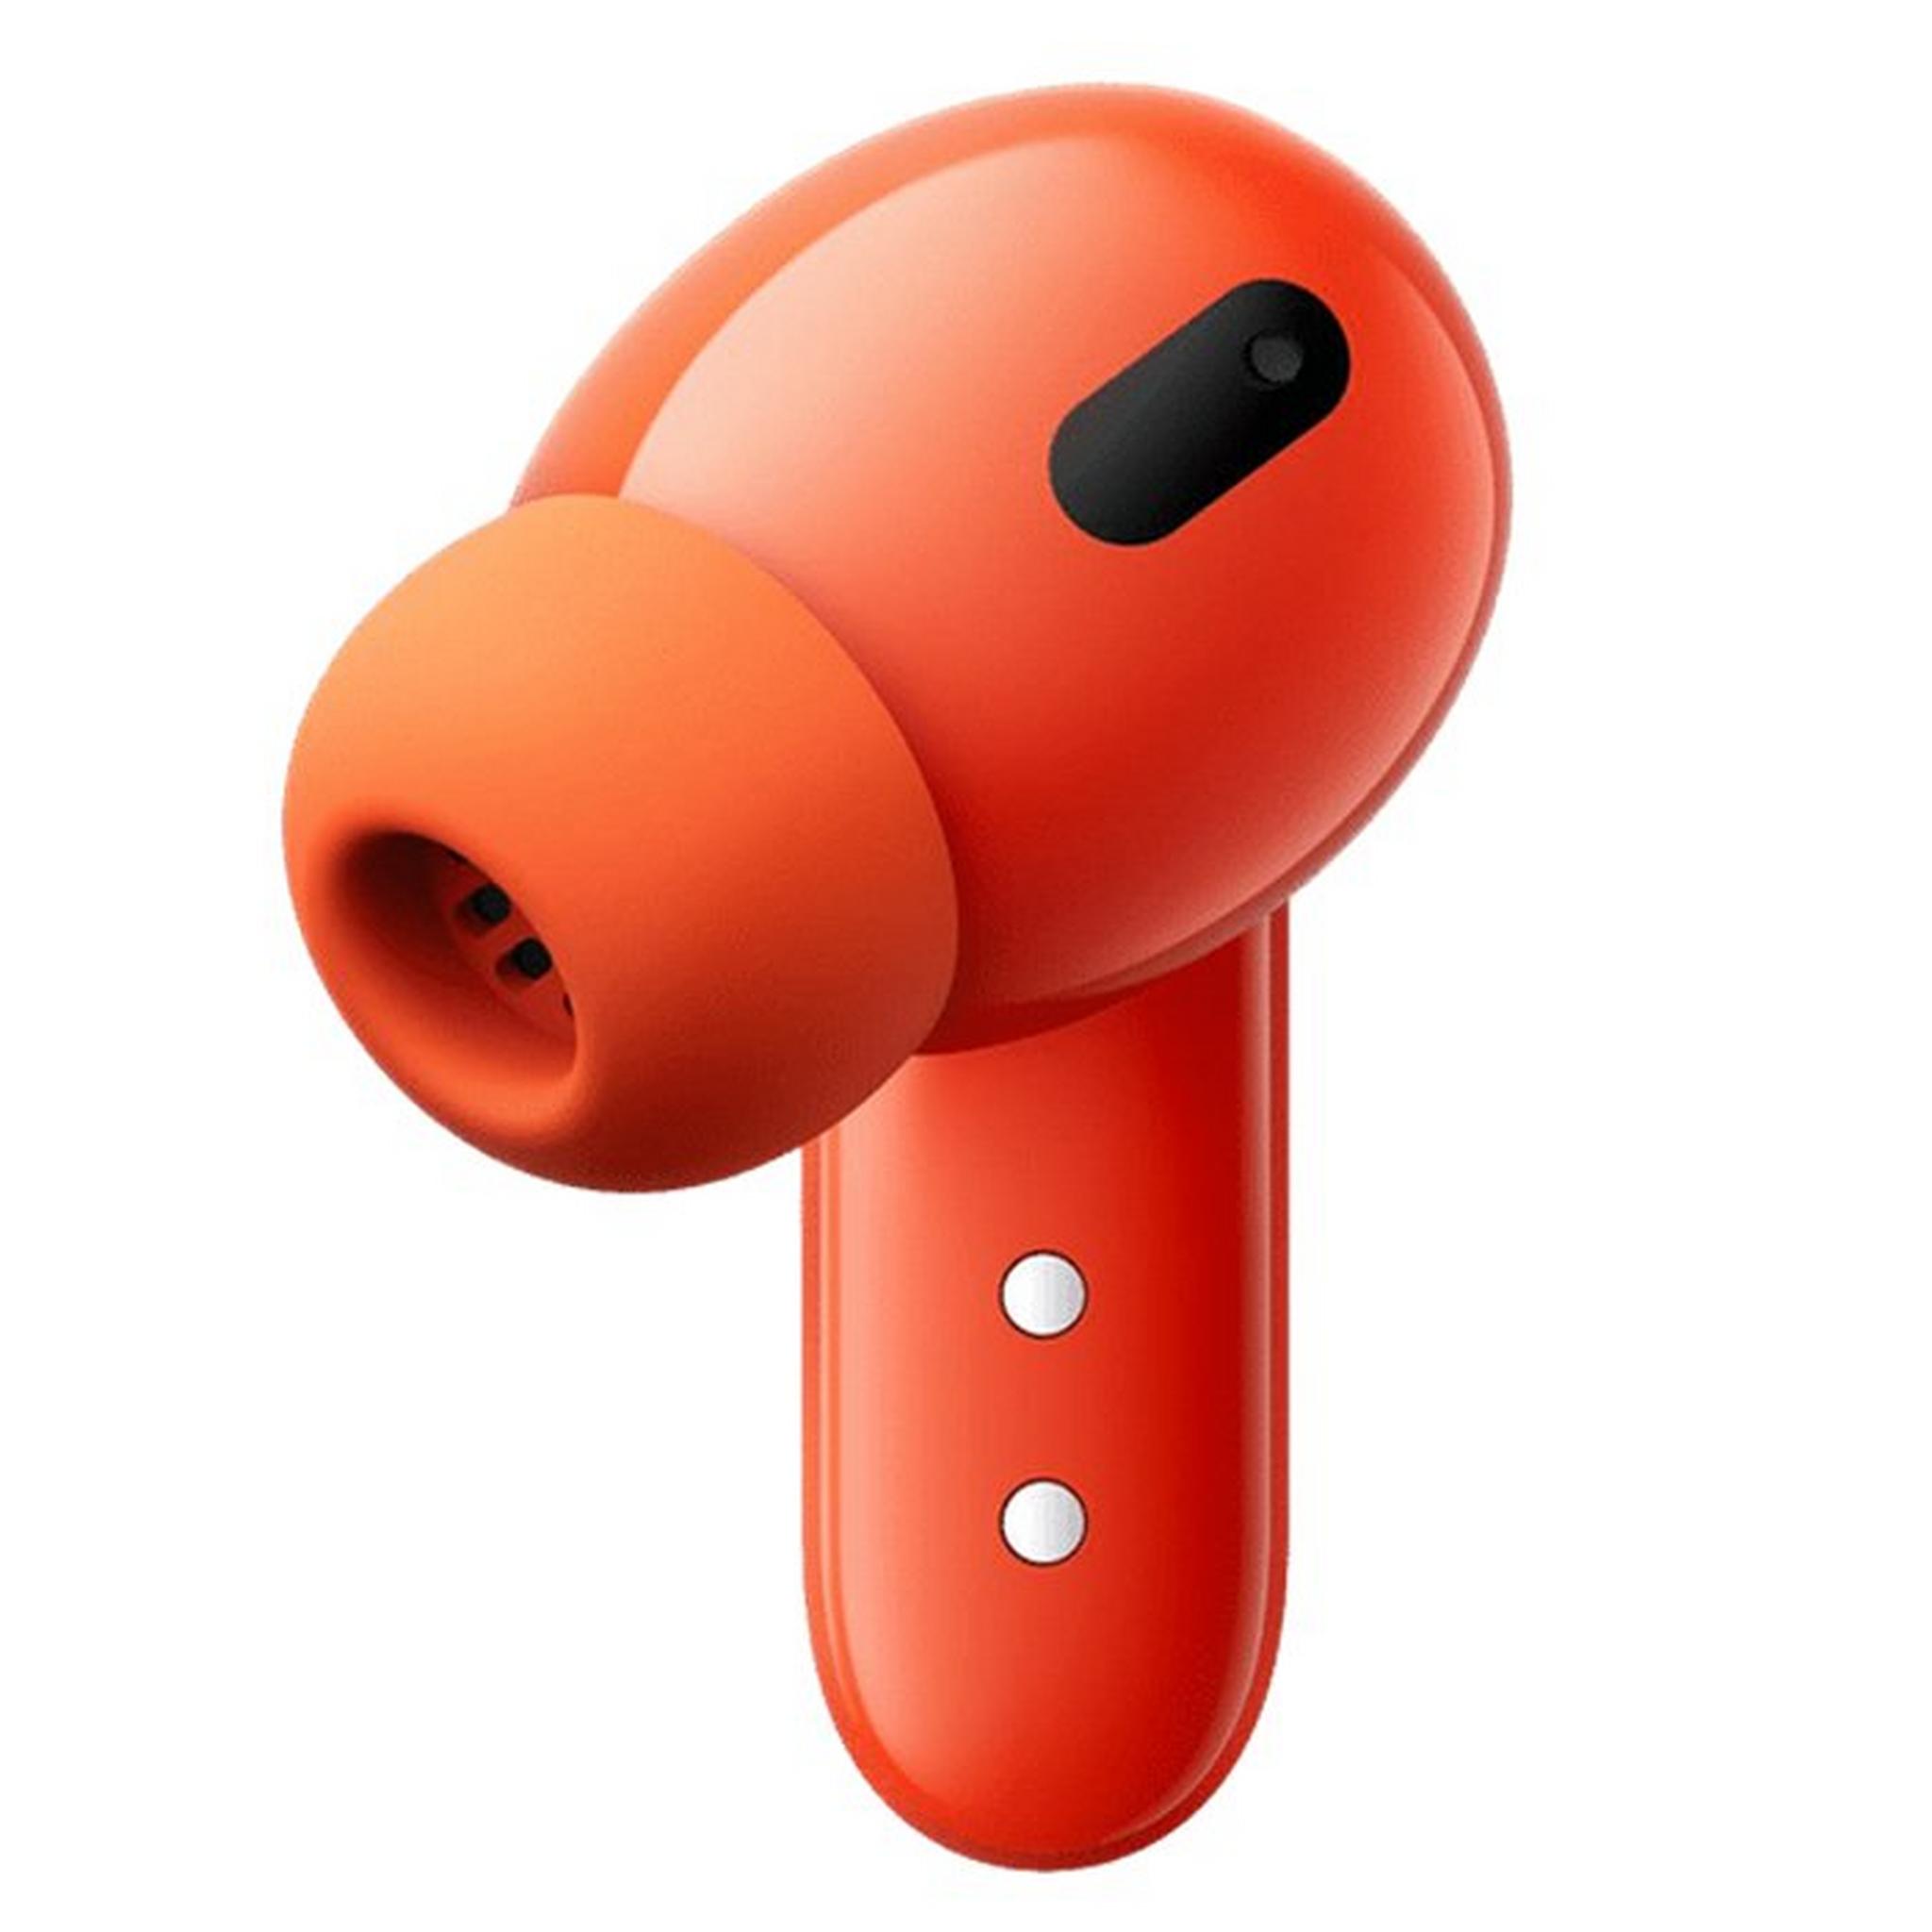 Nothing CMF Buds Pro Wireless Earbuds, A10600035 - Orange